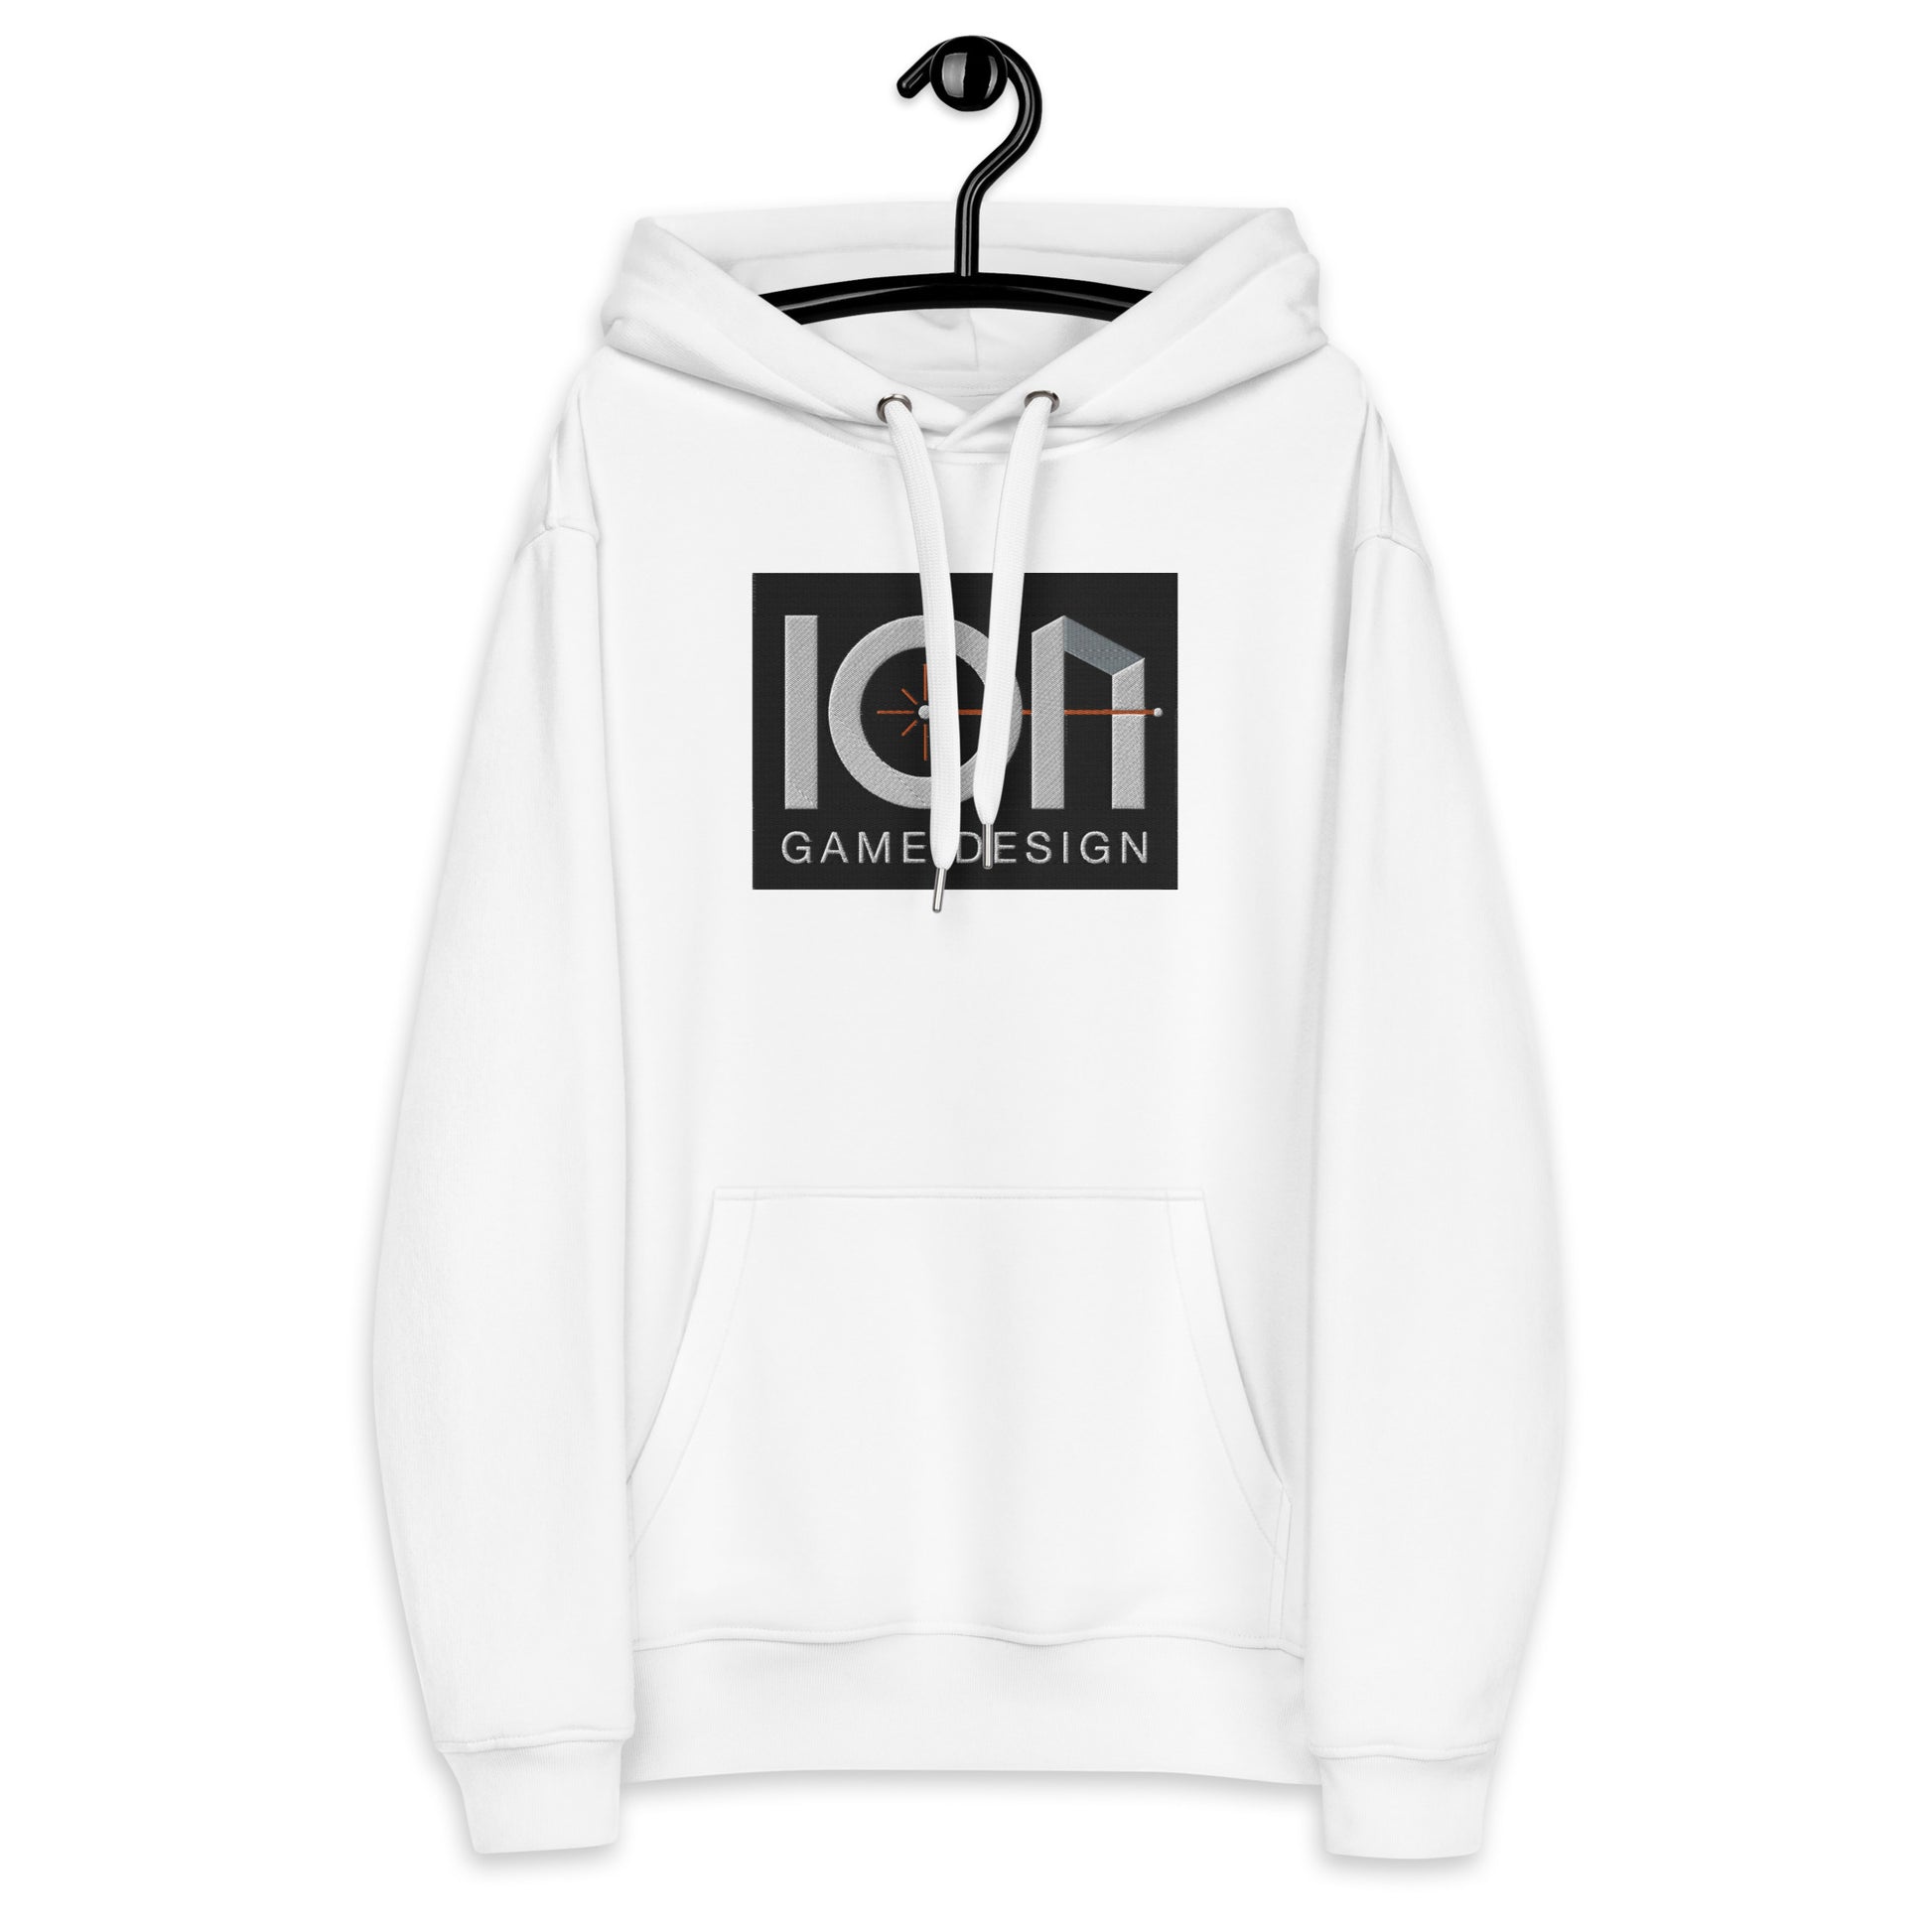 ION Game Design Premium ECO Hoodie - White  version of the hoodie embroidered with the company's logo